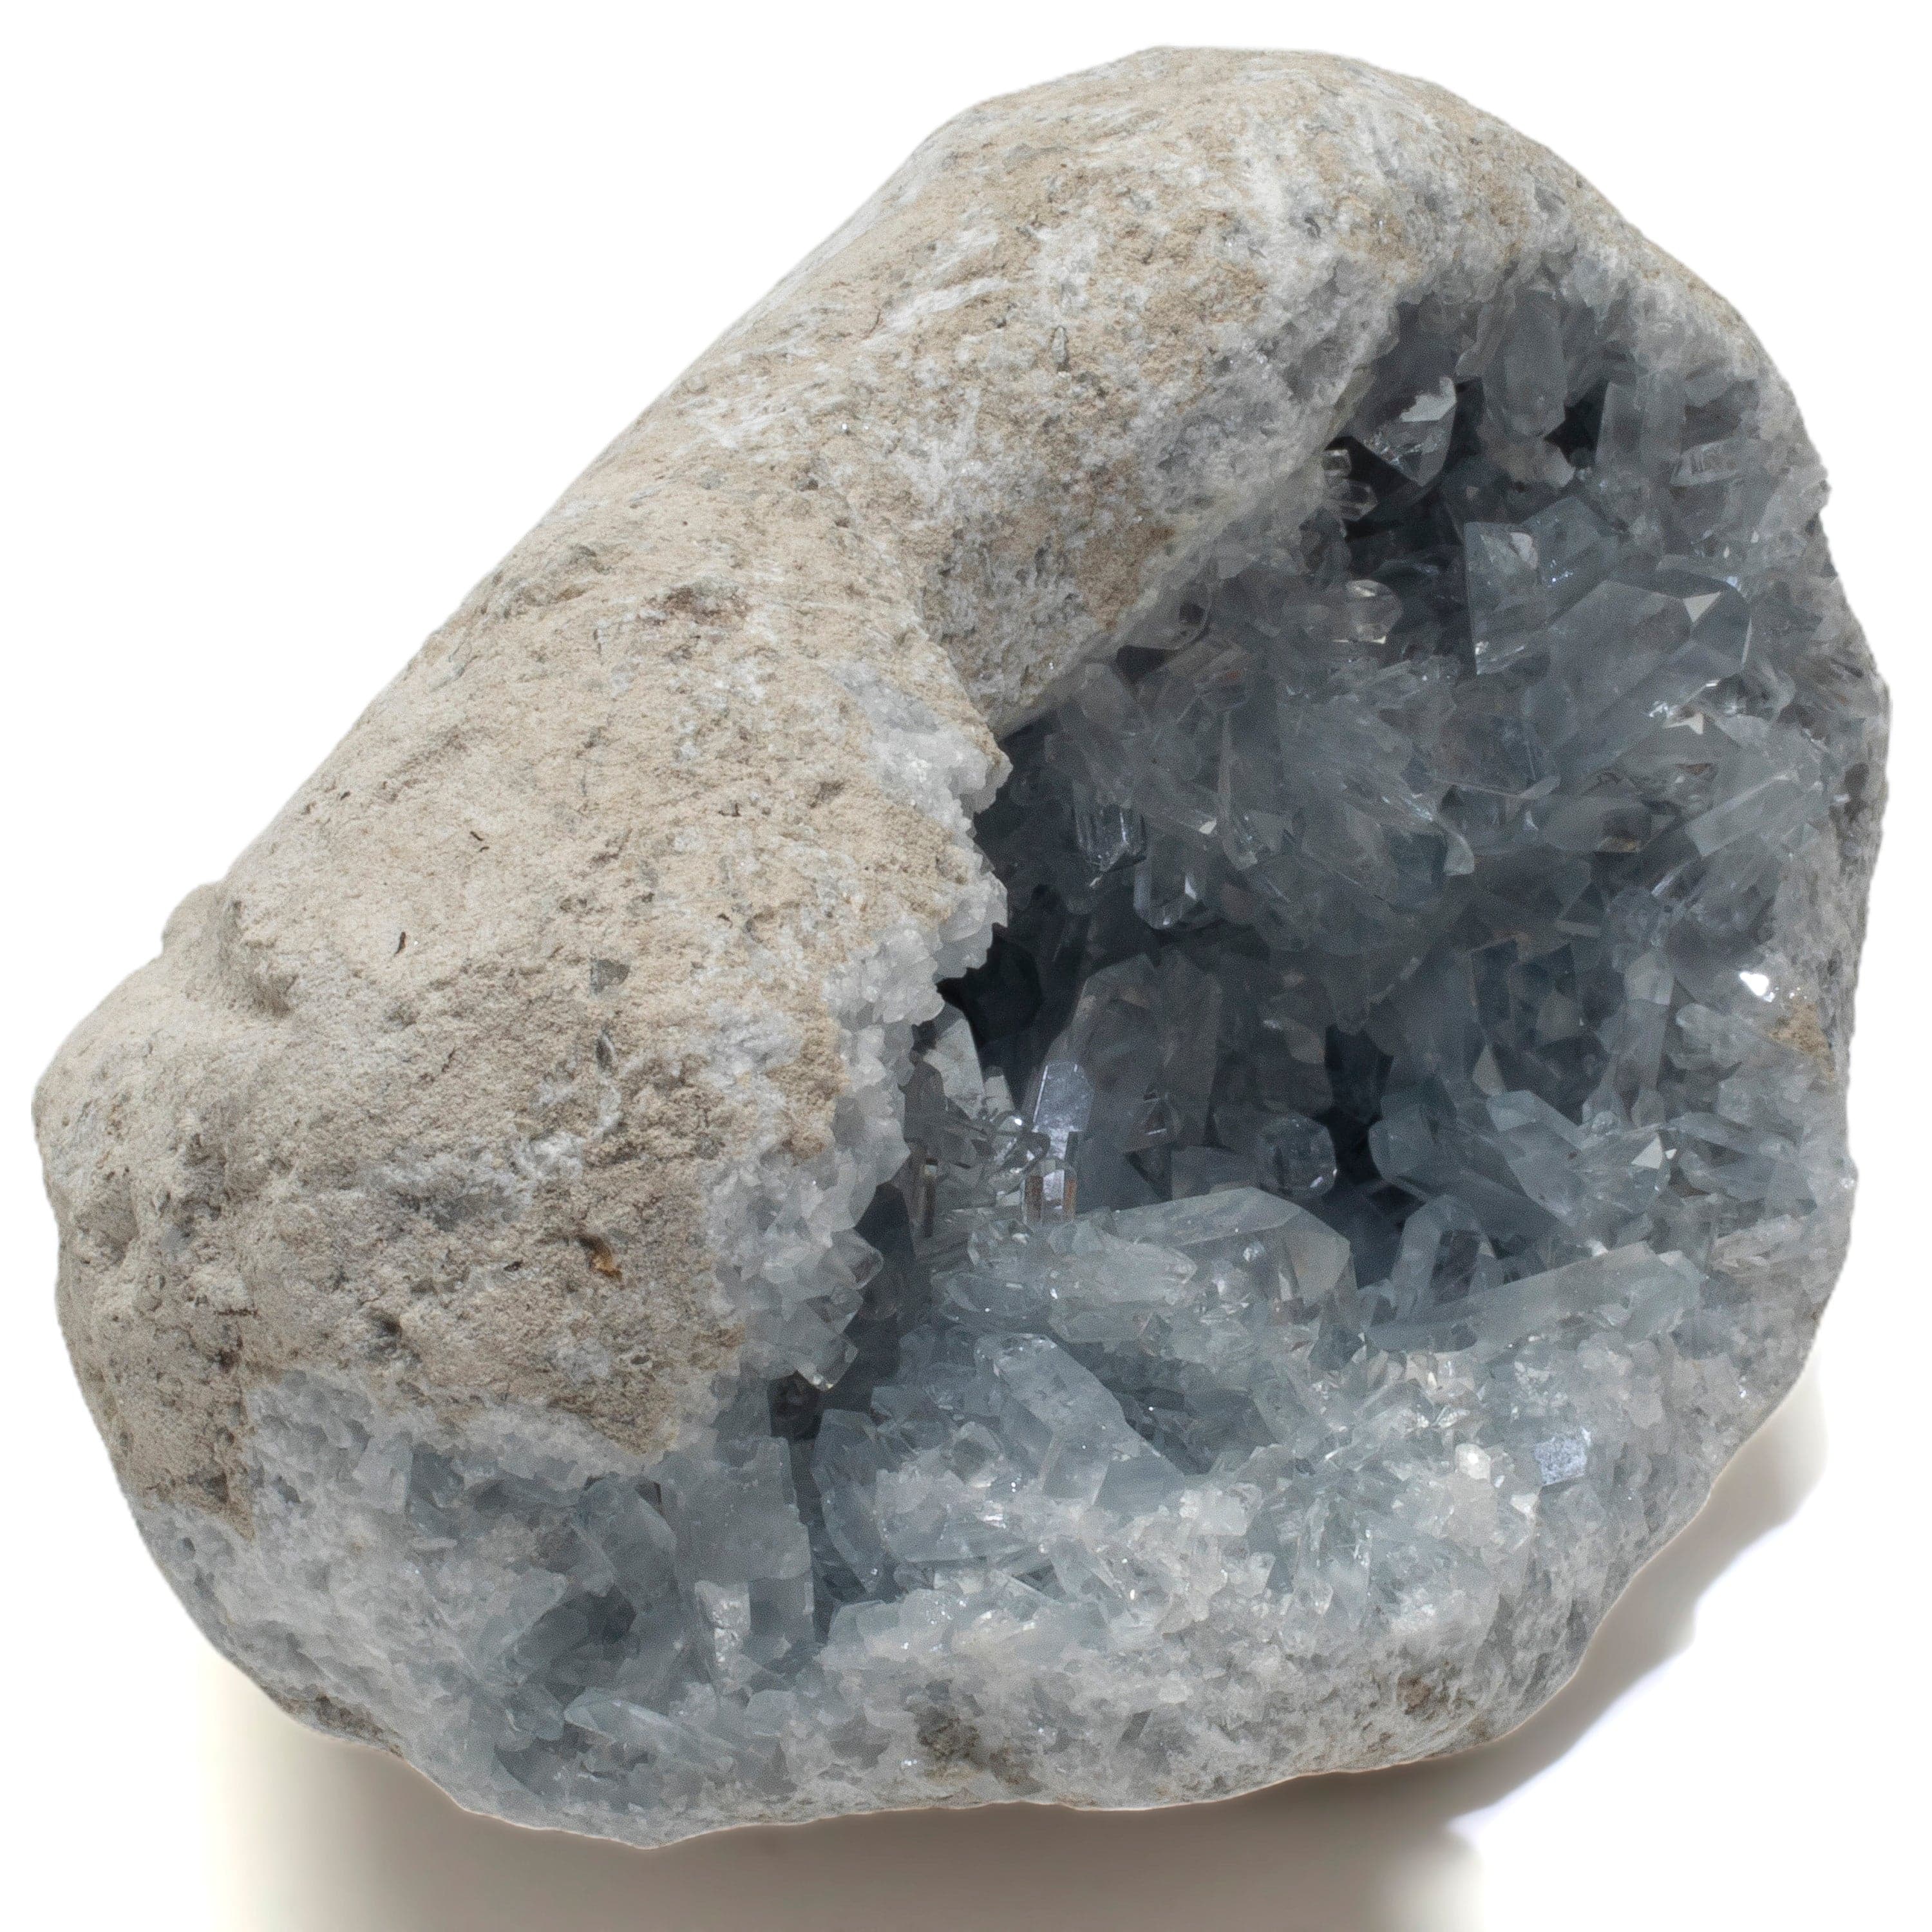 Kalifano Celestite Natural Celestite Crystal Cluster Geode from Madagascar - 8.5 in. CG1600.001